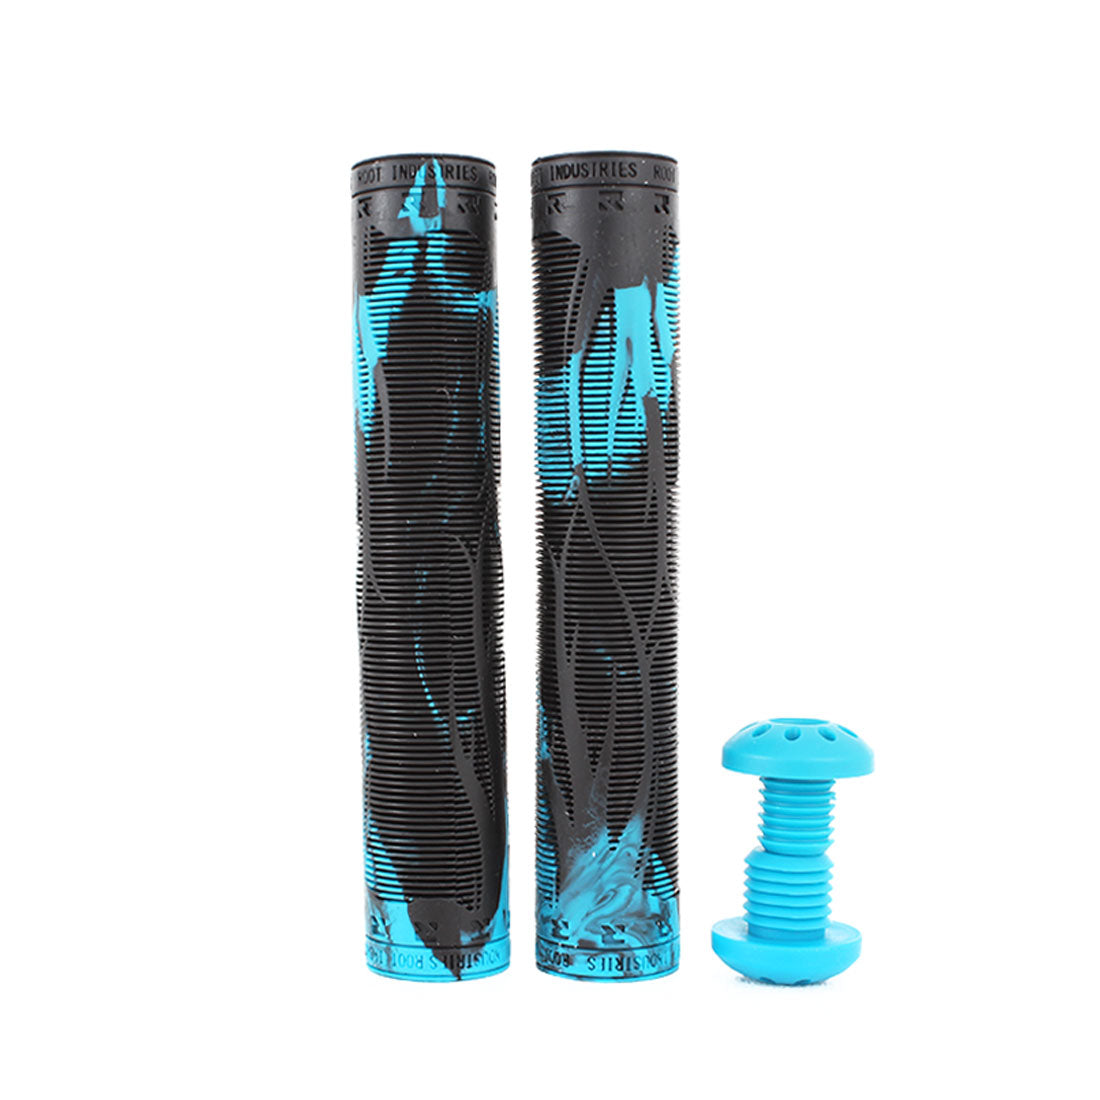 Root Industries R2 Air Grips - Aqua/Black Scooter Grips